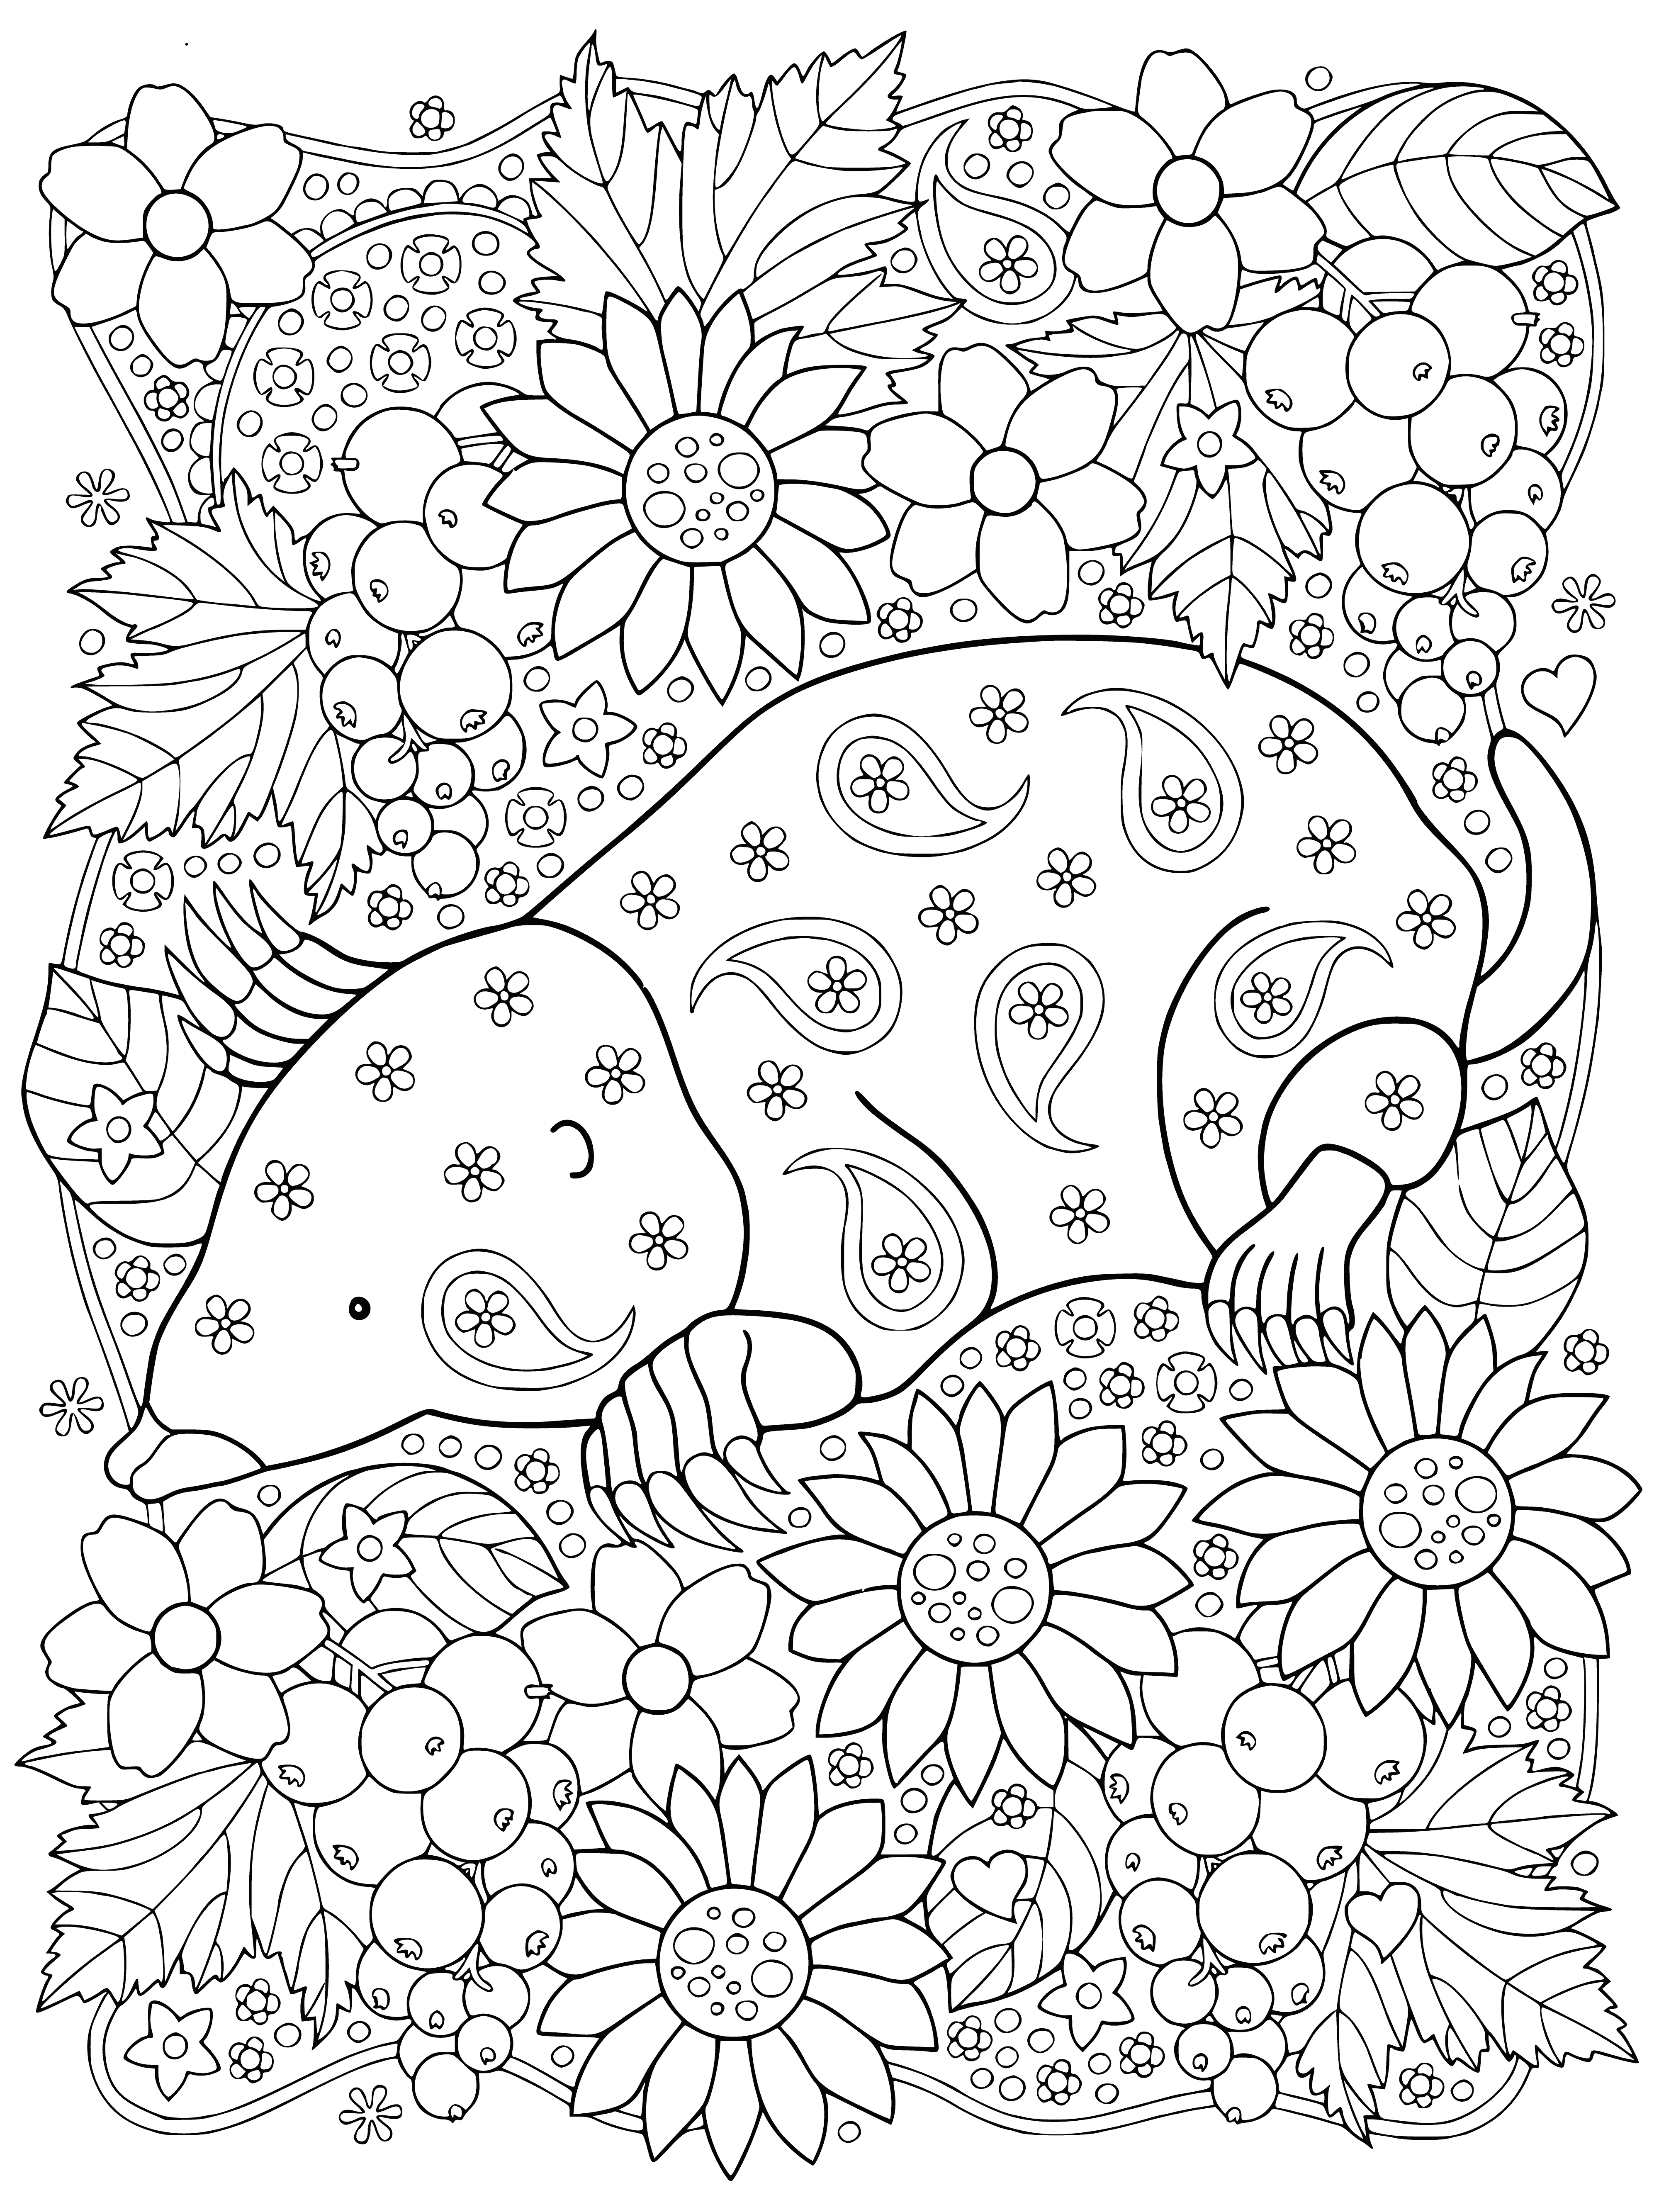 coloring page: Mole in garden near plants, small brown creature with long snout and small eyes, digging with claws.